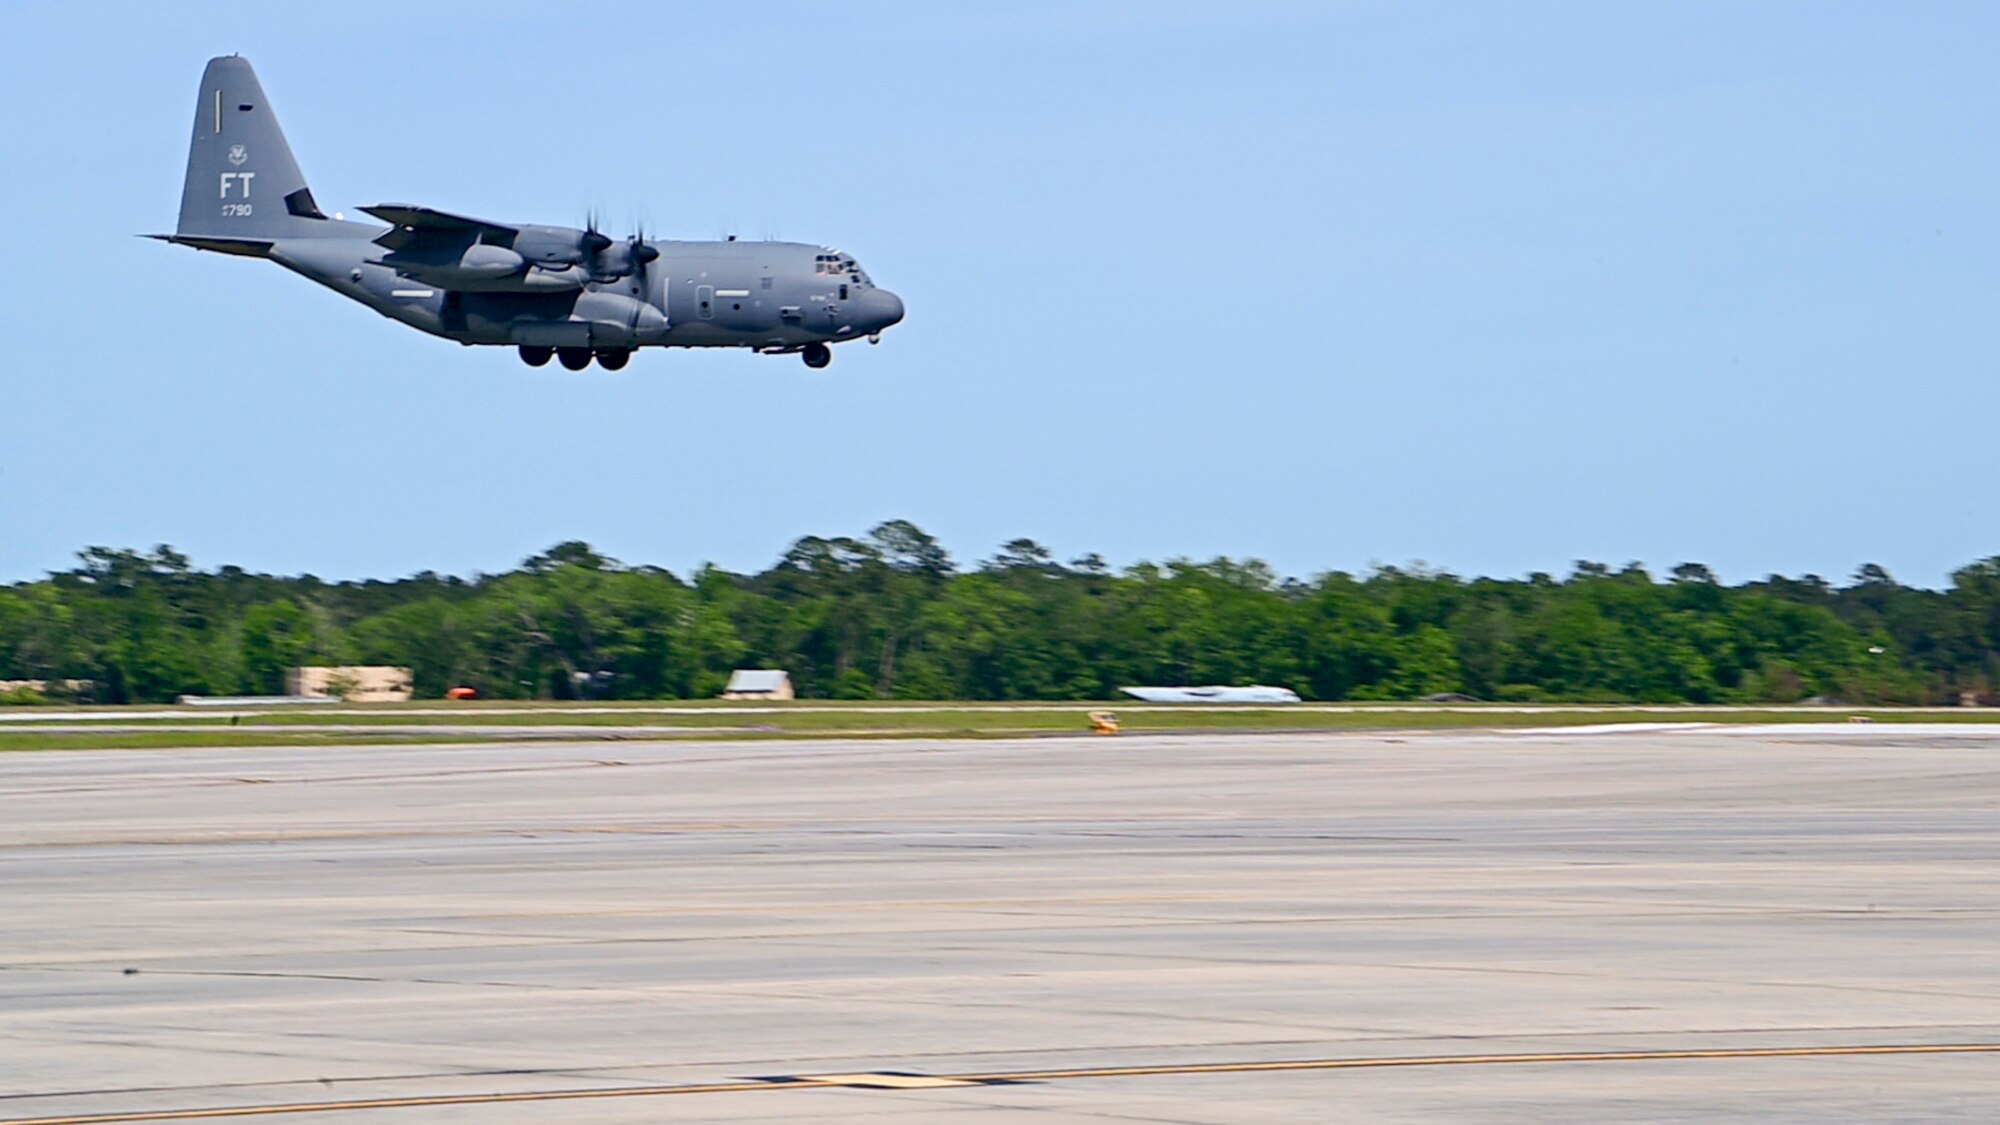 U.S. Air Force Airmen assigned to the 71st Rescue Squadron prepare to land an HC-130J Combat King II during Exercise Ready Tiger 24-1 at Moody Air Force Base, Georgia, April 8, 2024. The 71st RQS is responsible for the transportation of cargo and Moody personnel throughout Exercise Ready Tiger. Ready Tiger 24-1 is a readiness exercise demonstrating the 23rd Wing’s ability to plan, prepare and execute operations and maintenance to project air power in contested and dispersed locations, defending the United States’ interests and allies. (U.S. Air Force photo by 2nd Lt. Benjamin Williams)